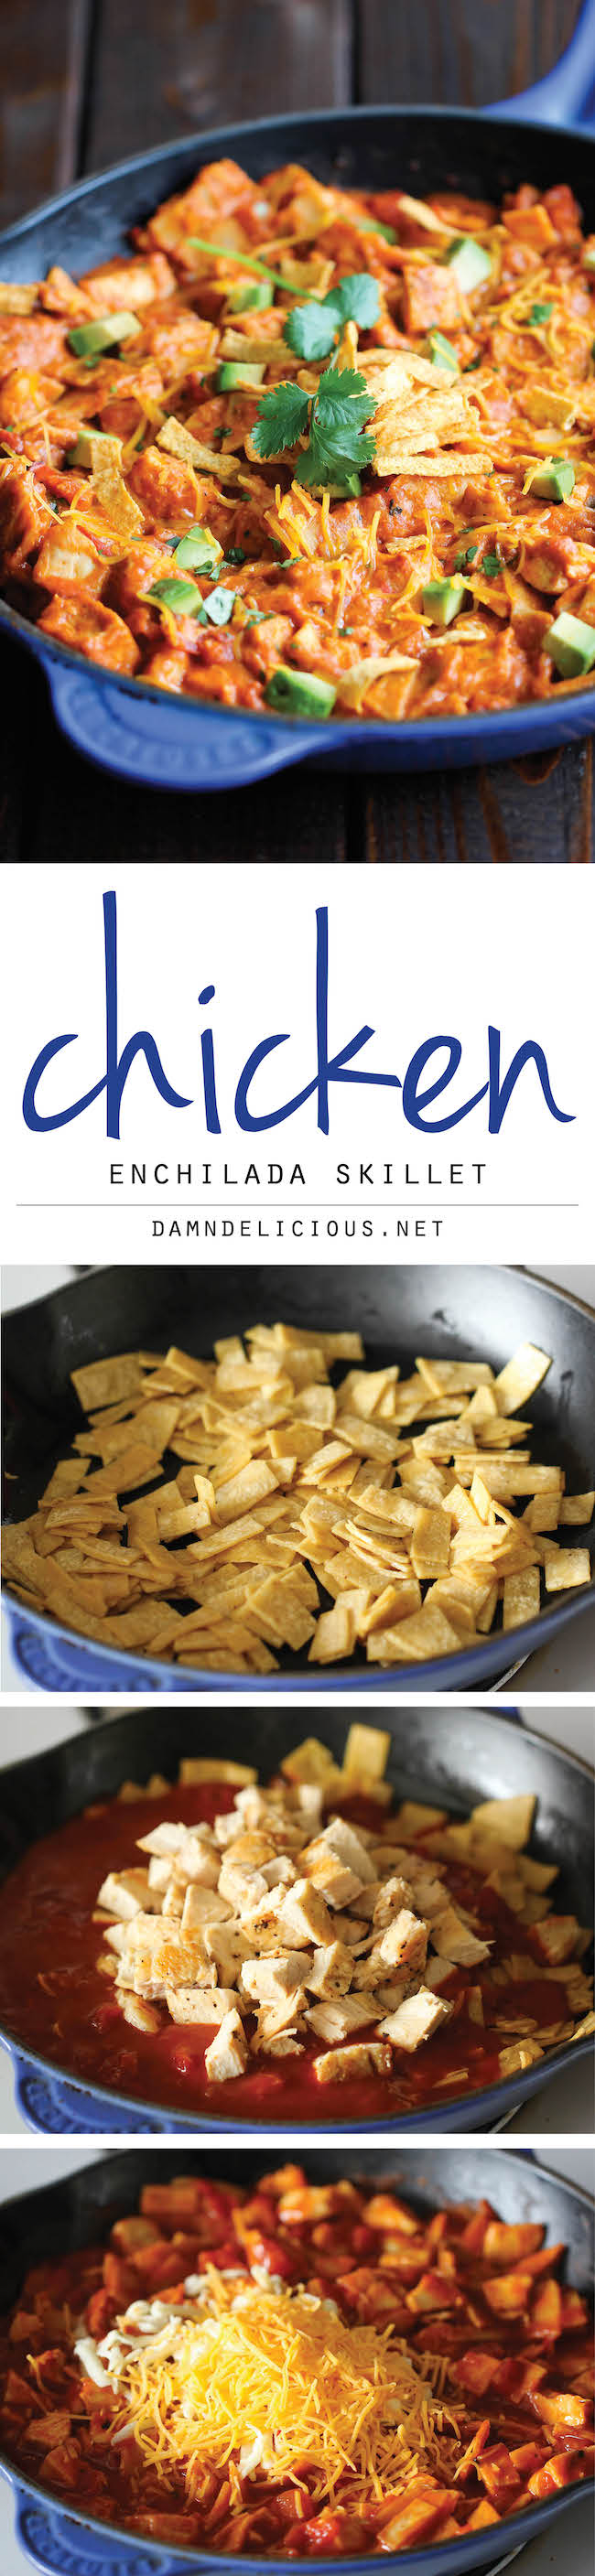 Chicken Enchilada Skillet - An easy, no-fuss, 30 min cheesy skillet dish that the whole family will love!